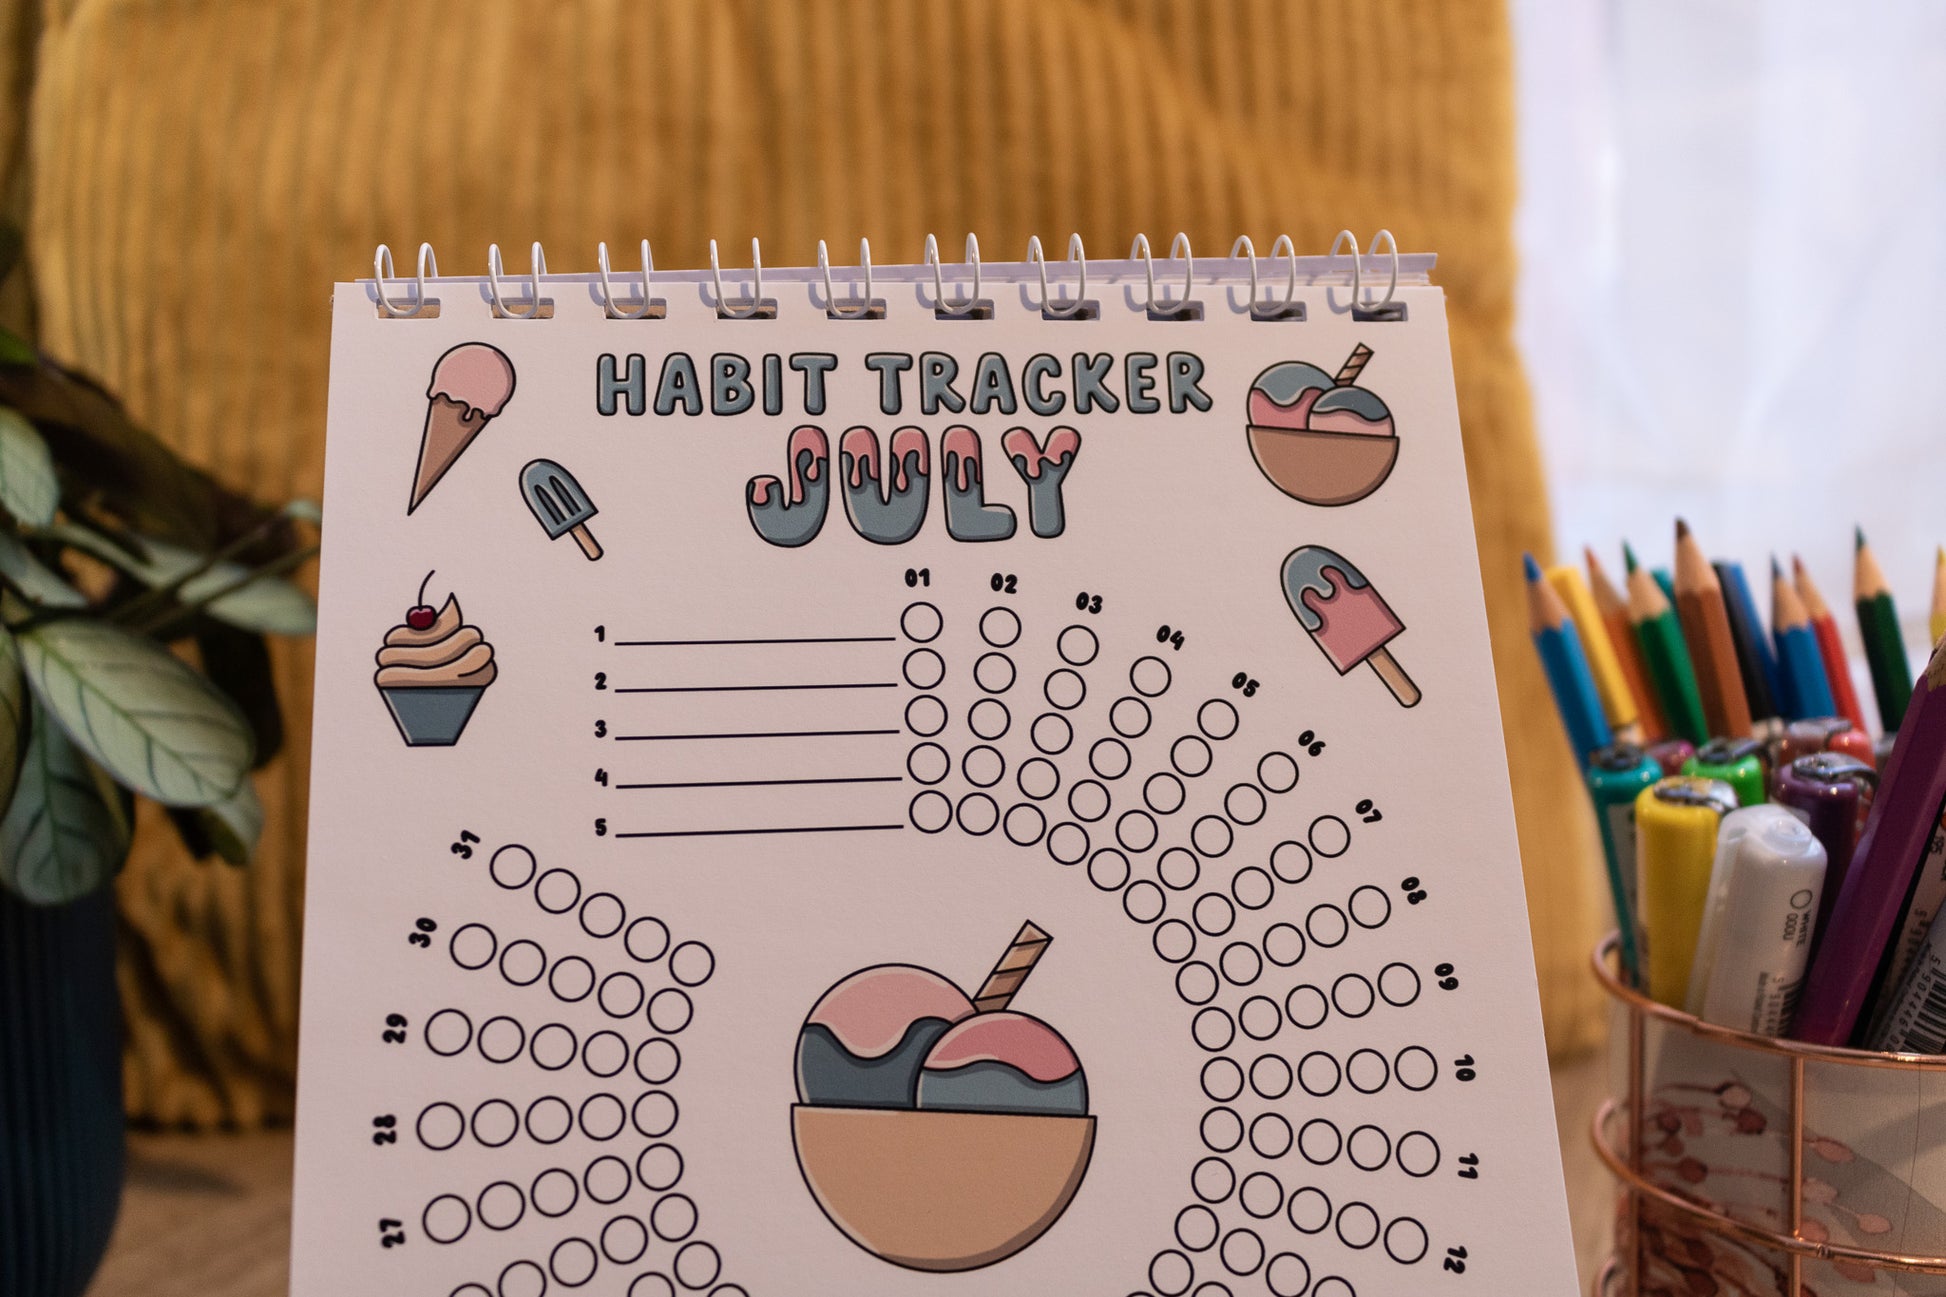 12-month Colouring Habit Tracker by MellowApricotStudio - A5 & A6 standing desk calendar - july page with ice cream